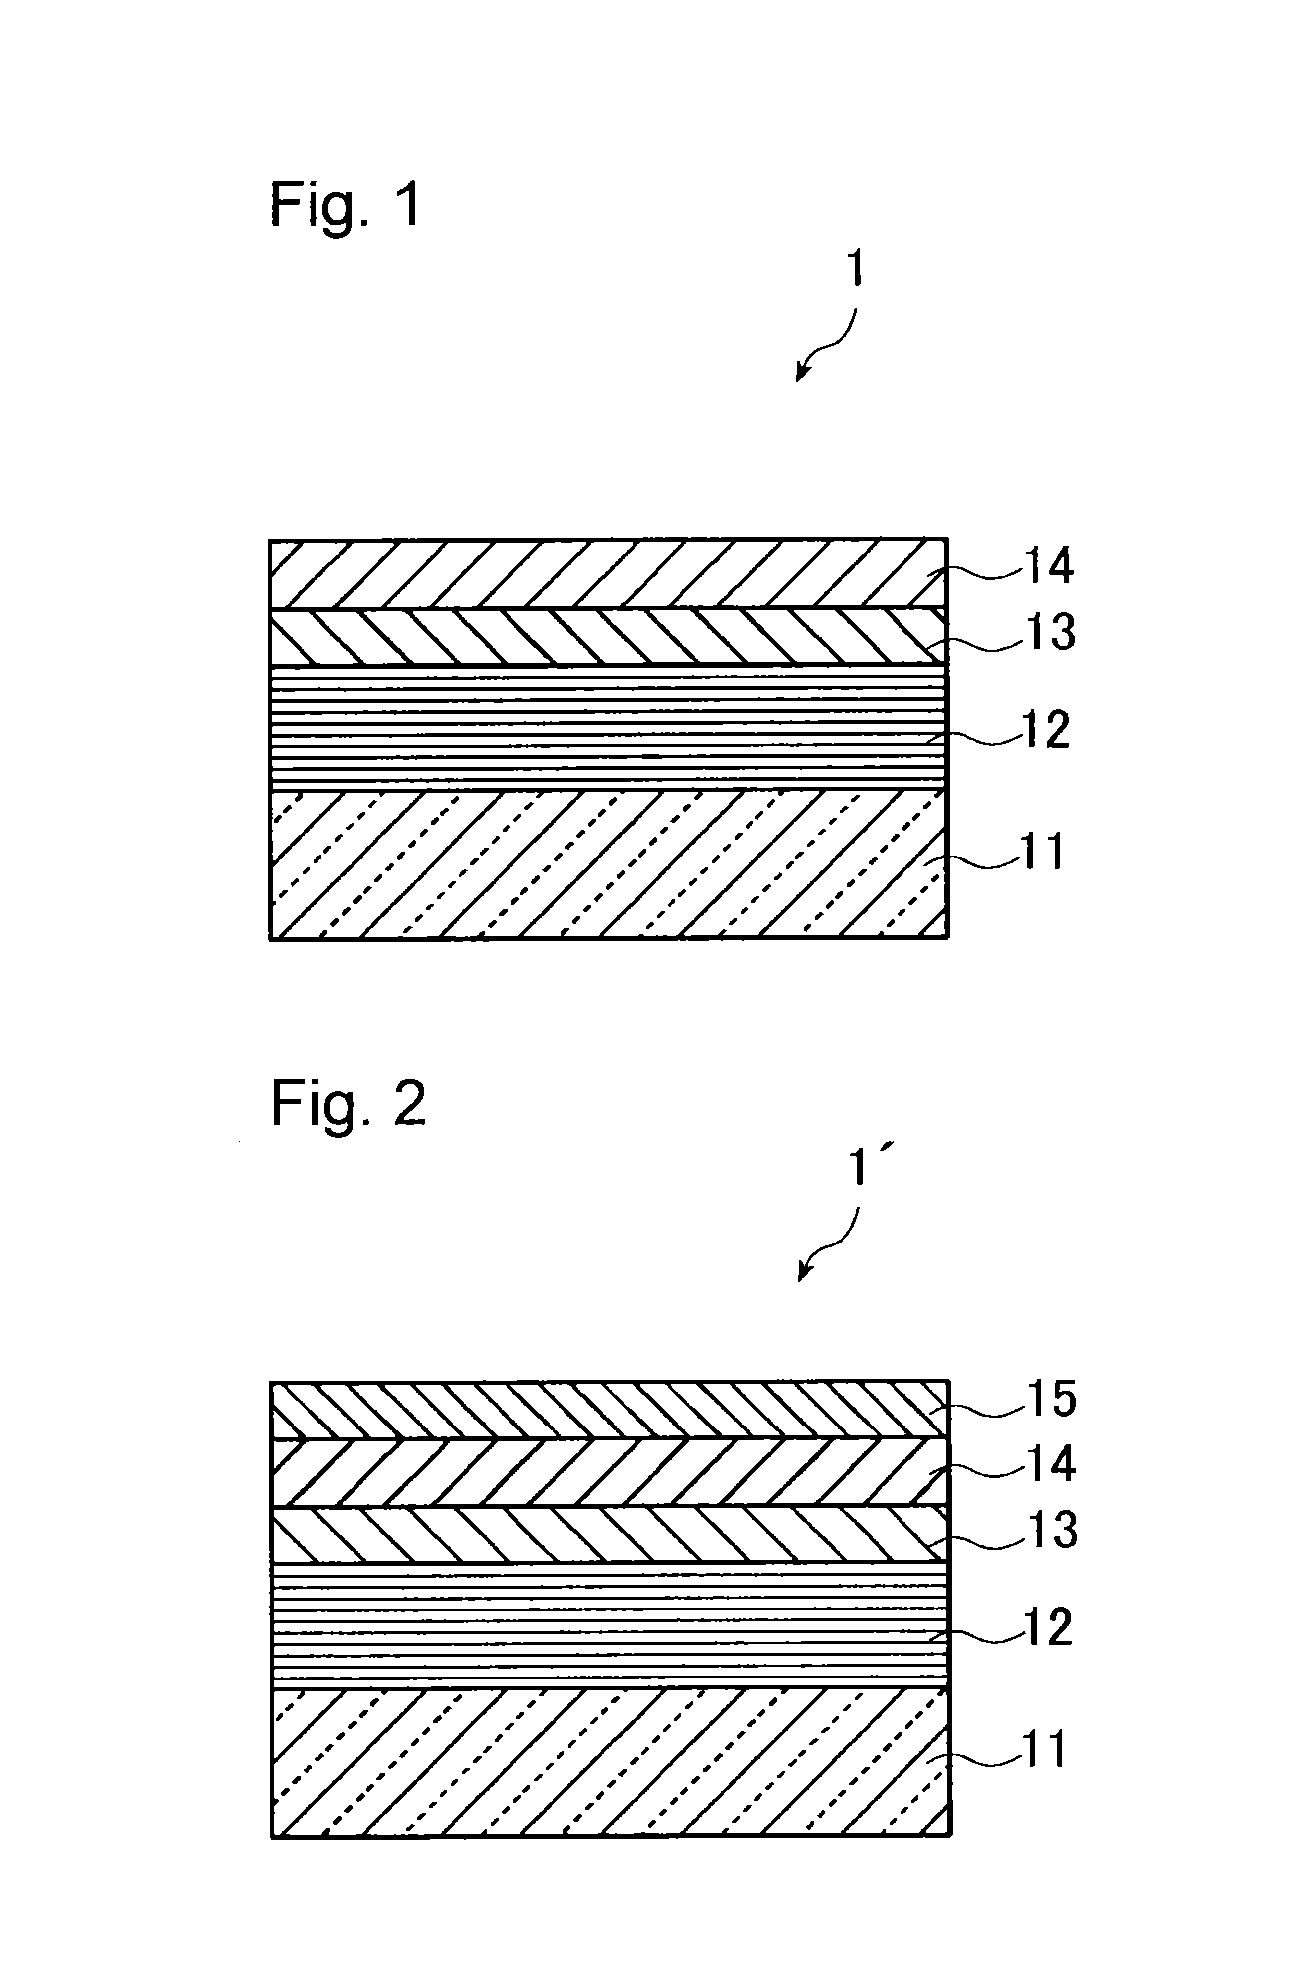 Reflective mask blank for EUV lithography and process for its production